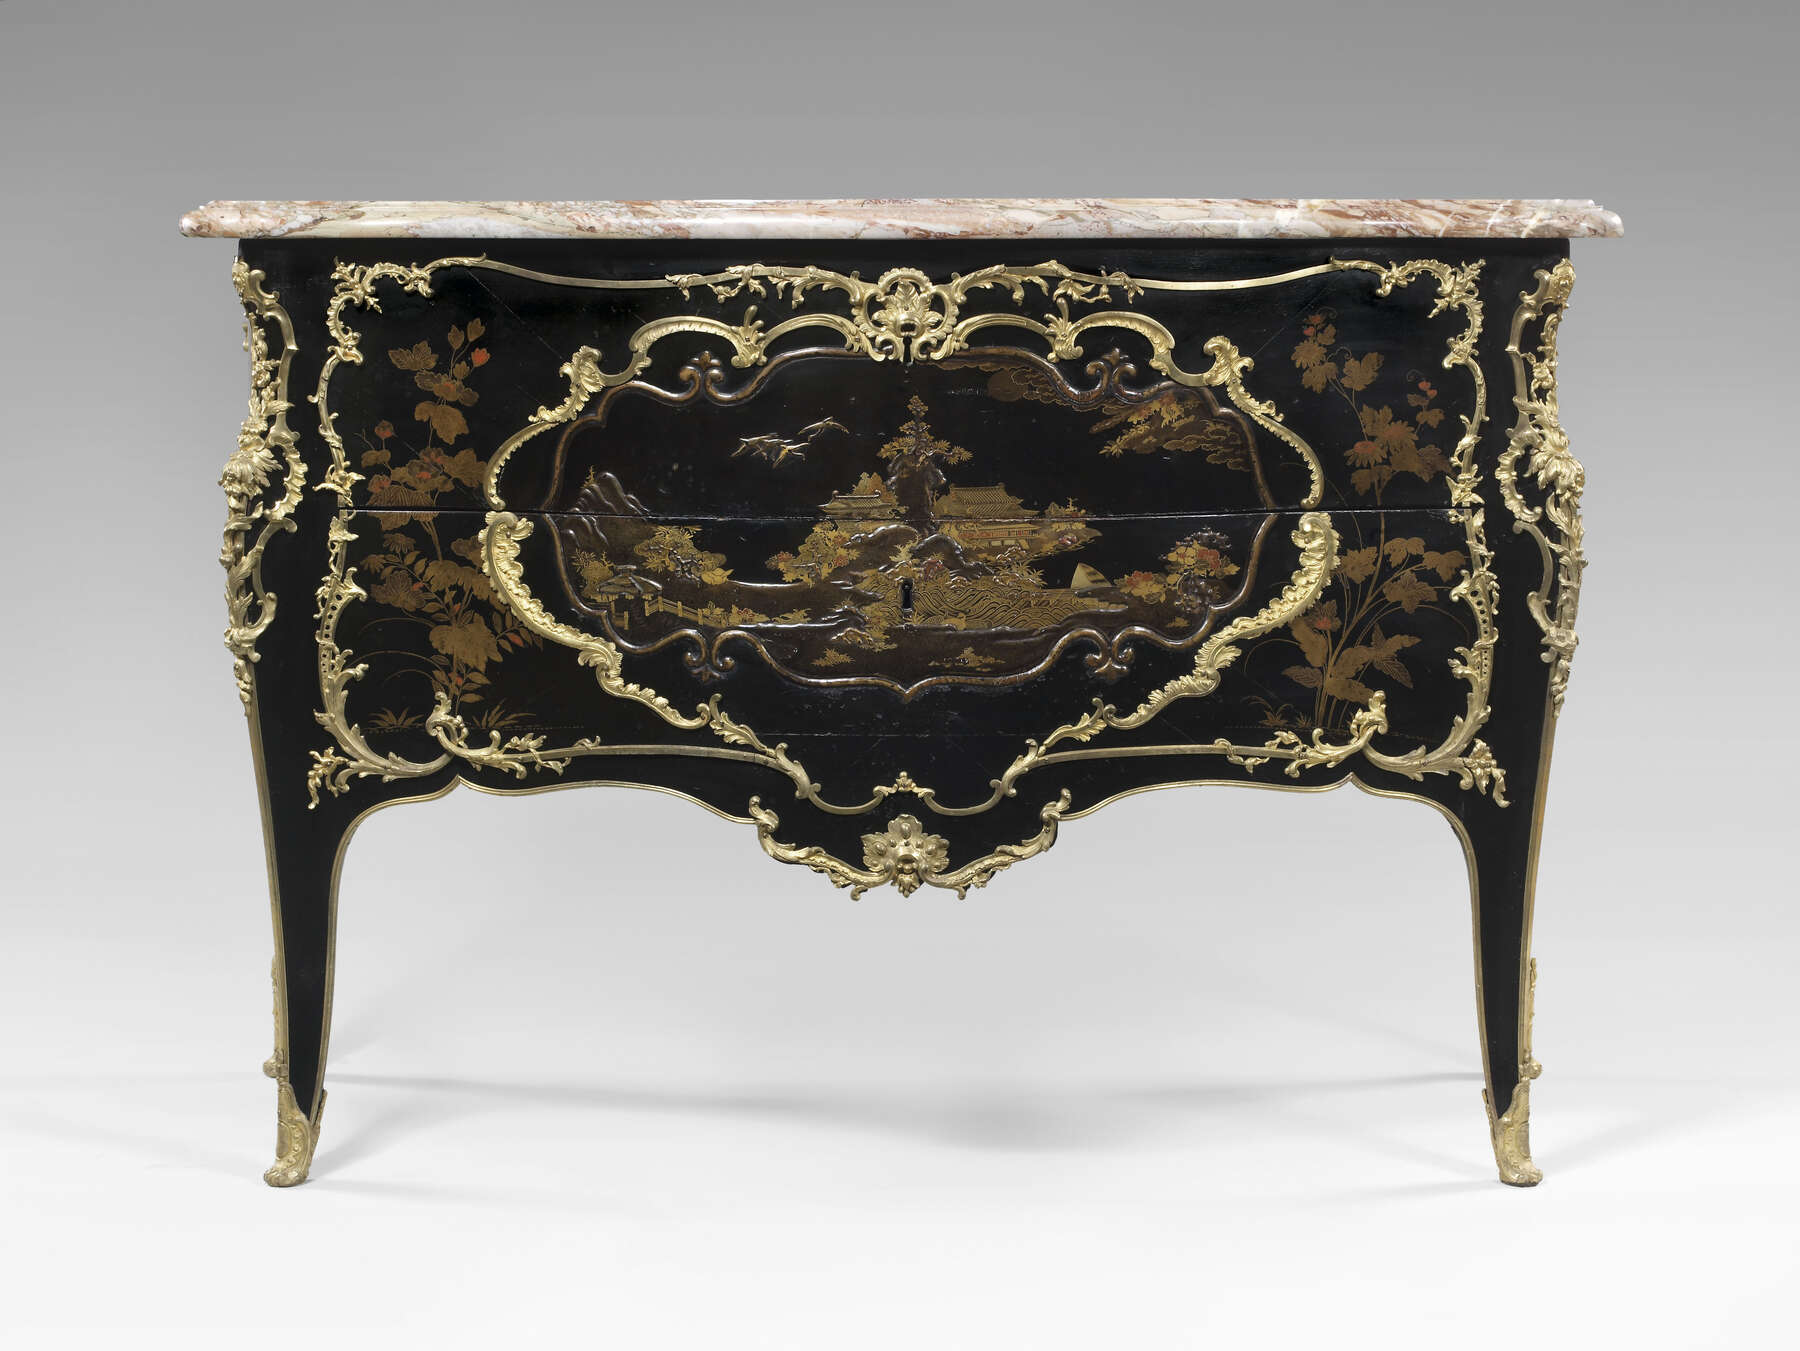 frontal view of another commode, decorated similarly to the Getty commode, with gilt bronze mounts, black, gold, and red lacquer designs, and a red and white veined marble top